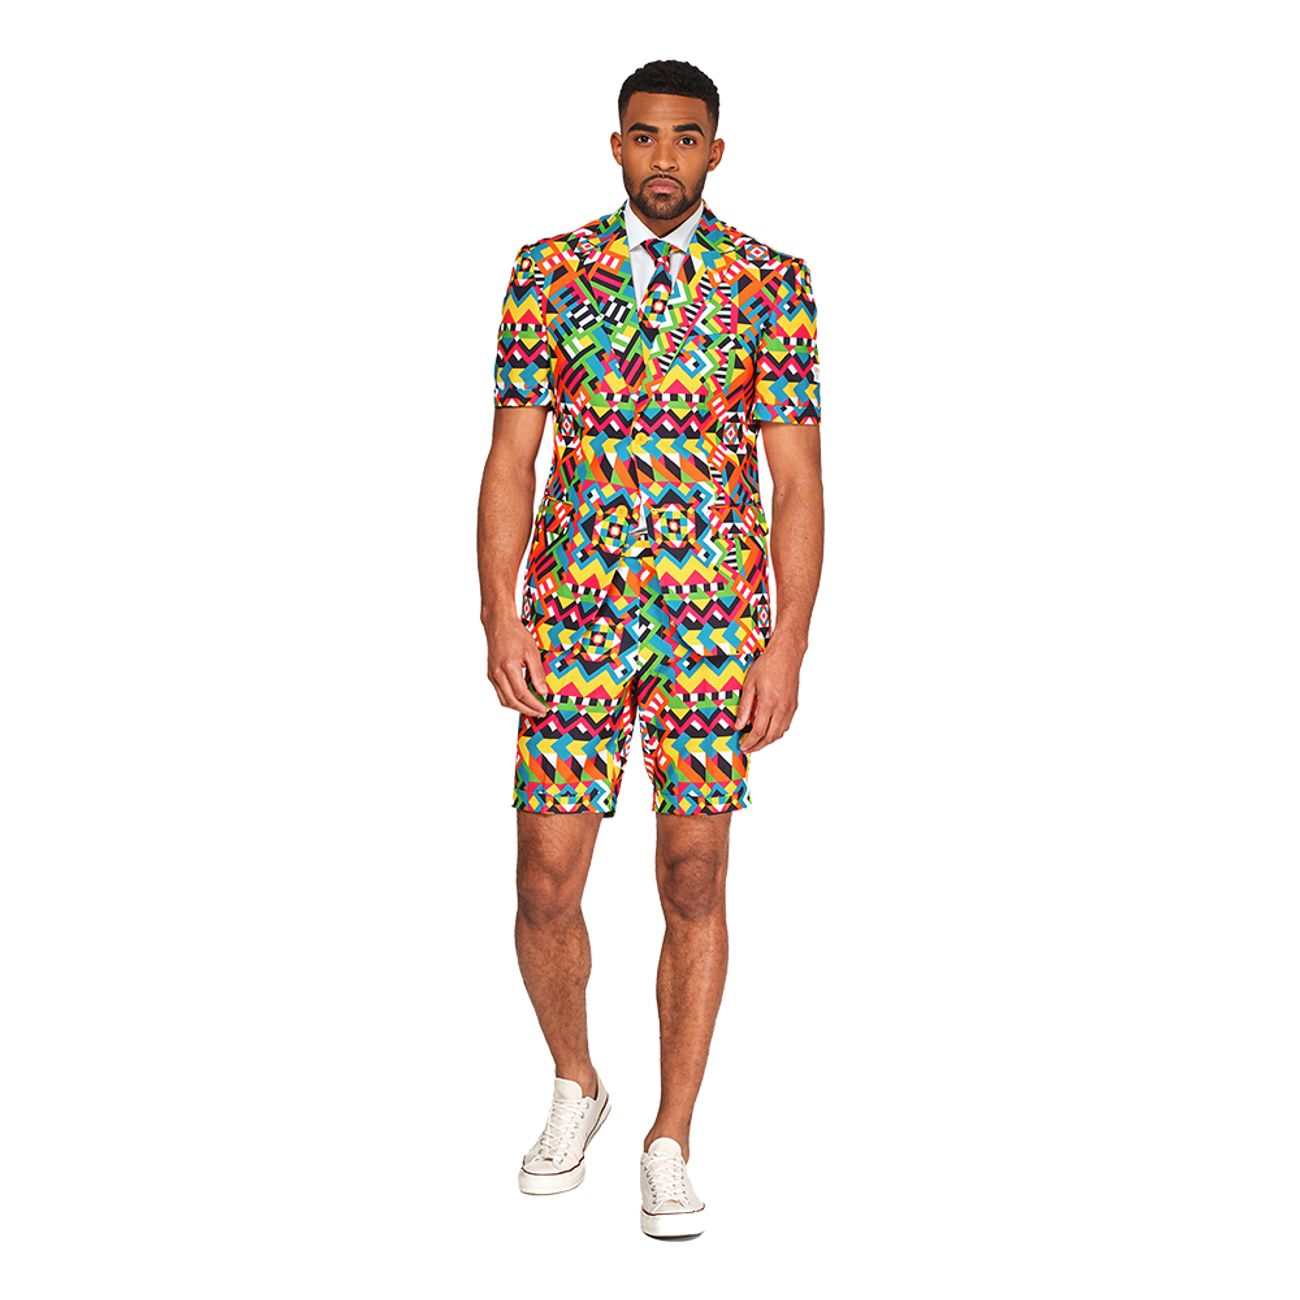 opposuits-abstractive-shorts-kostym-1